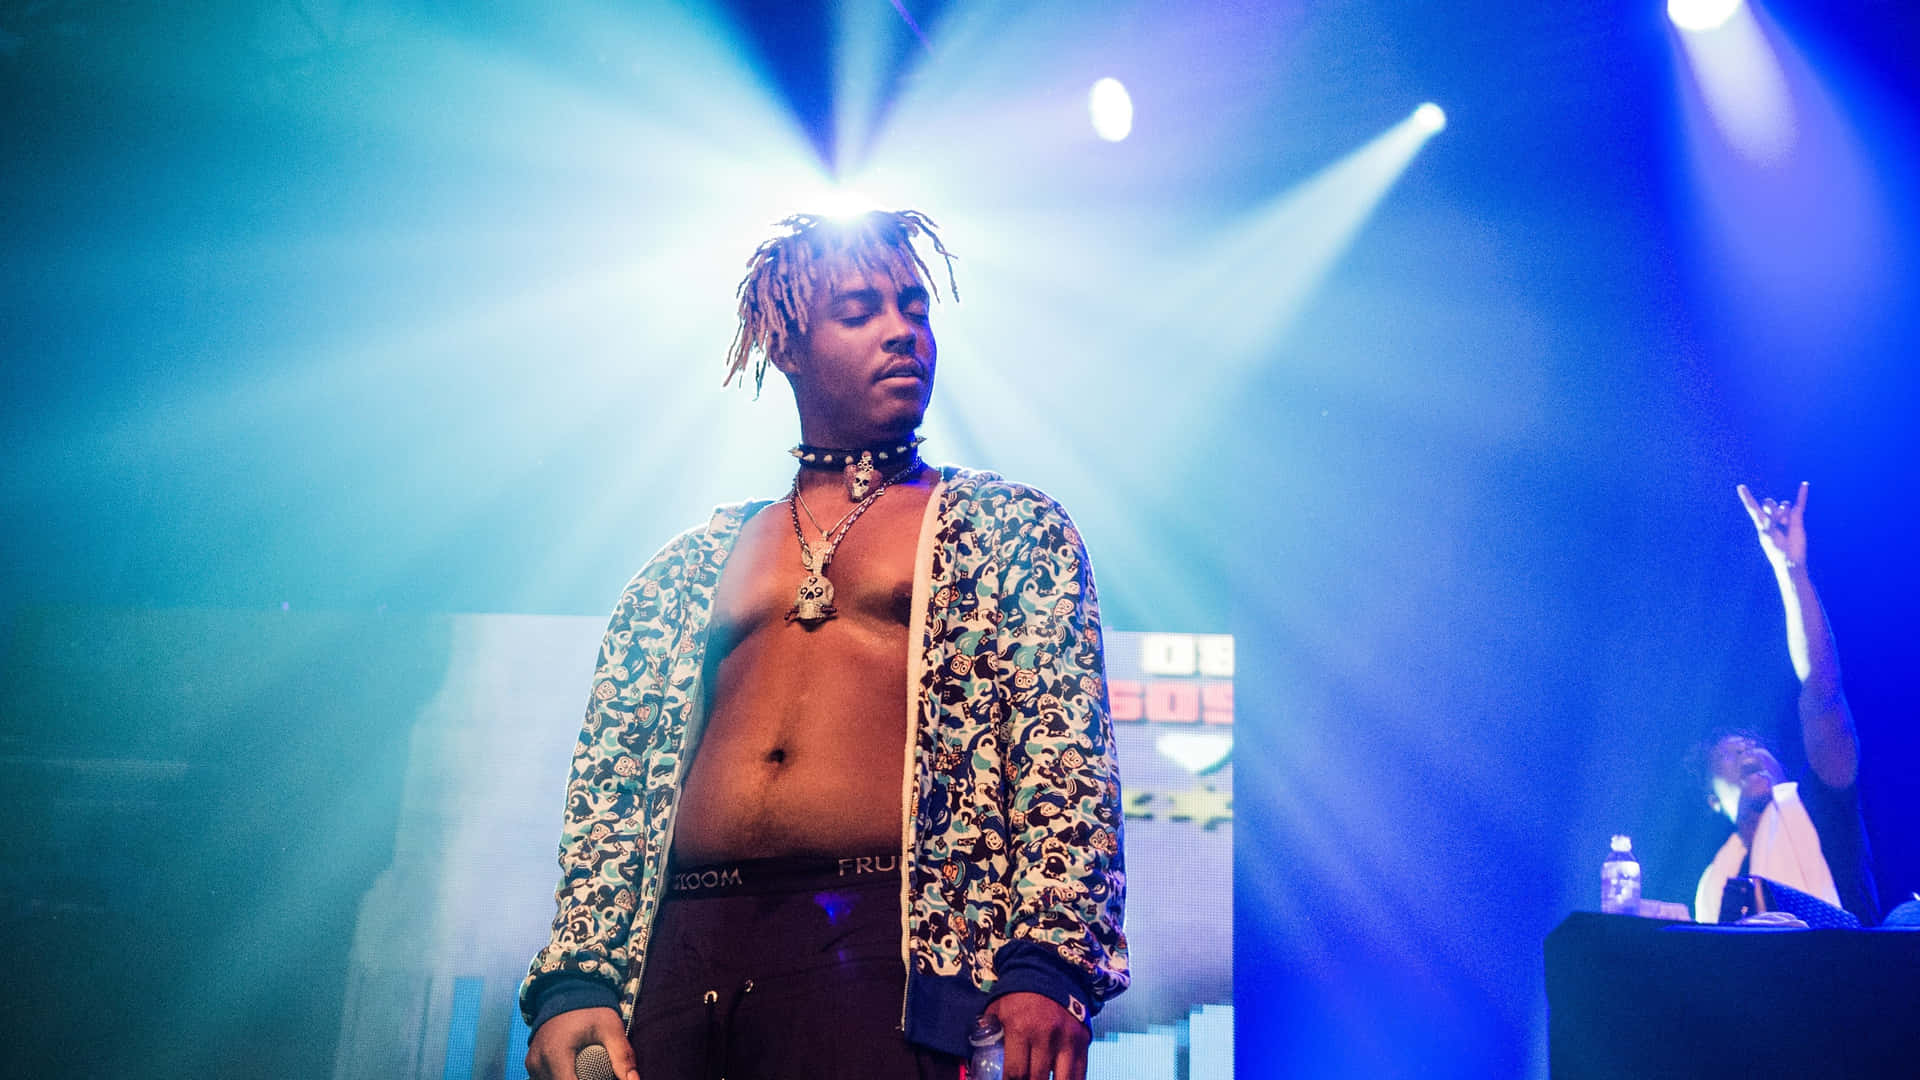 Juice Wrld electrifies the stage with his dynamic performance at a concert. Wallpaper